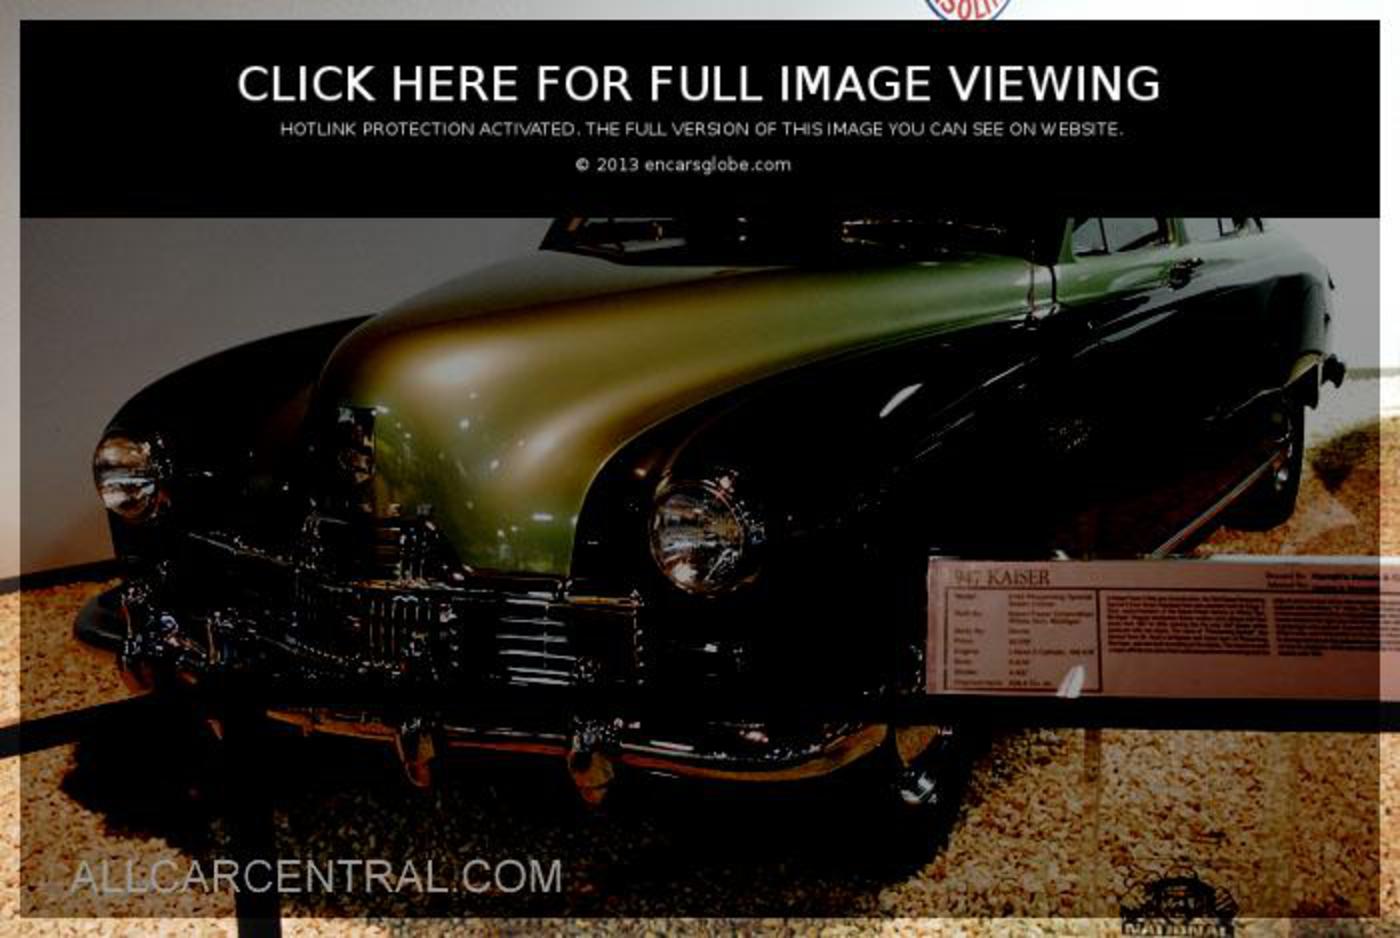 Kaiser Carabela Hearse Car Photo Gallery: Photo #05 out of 12 ...